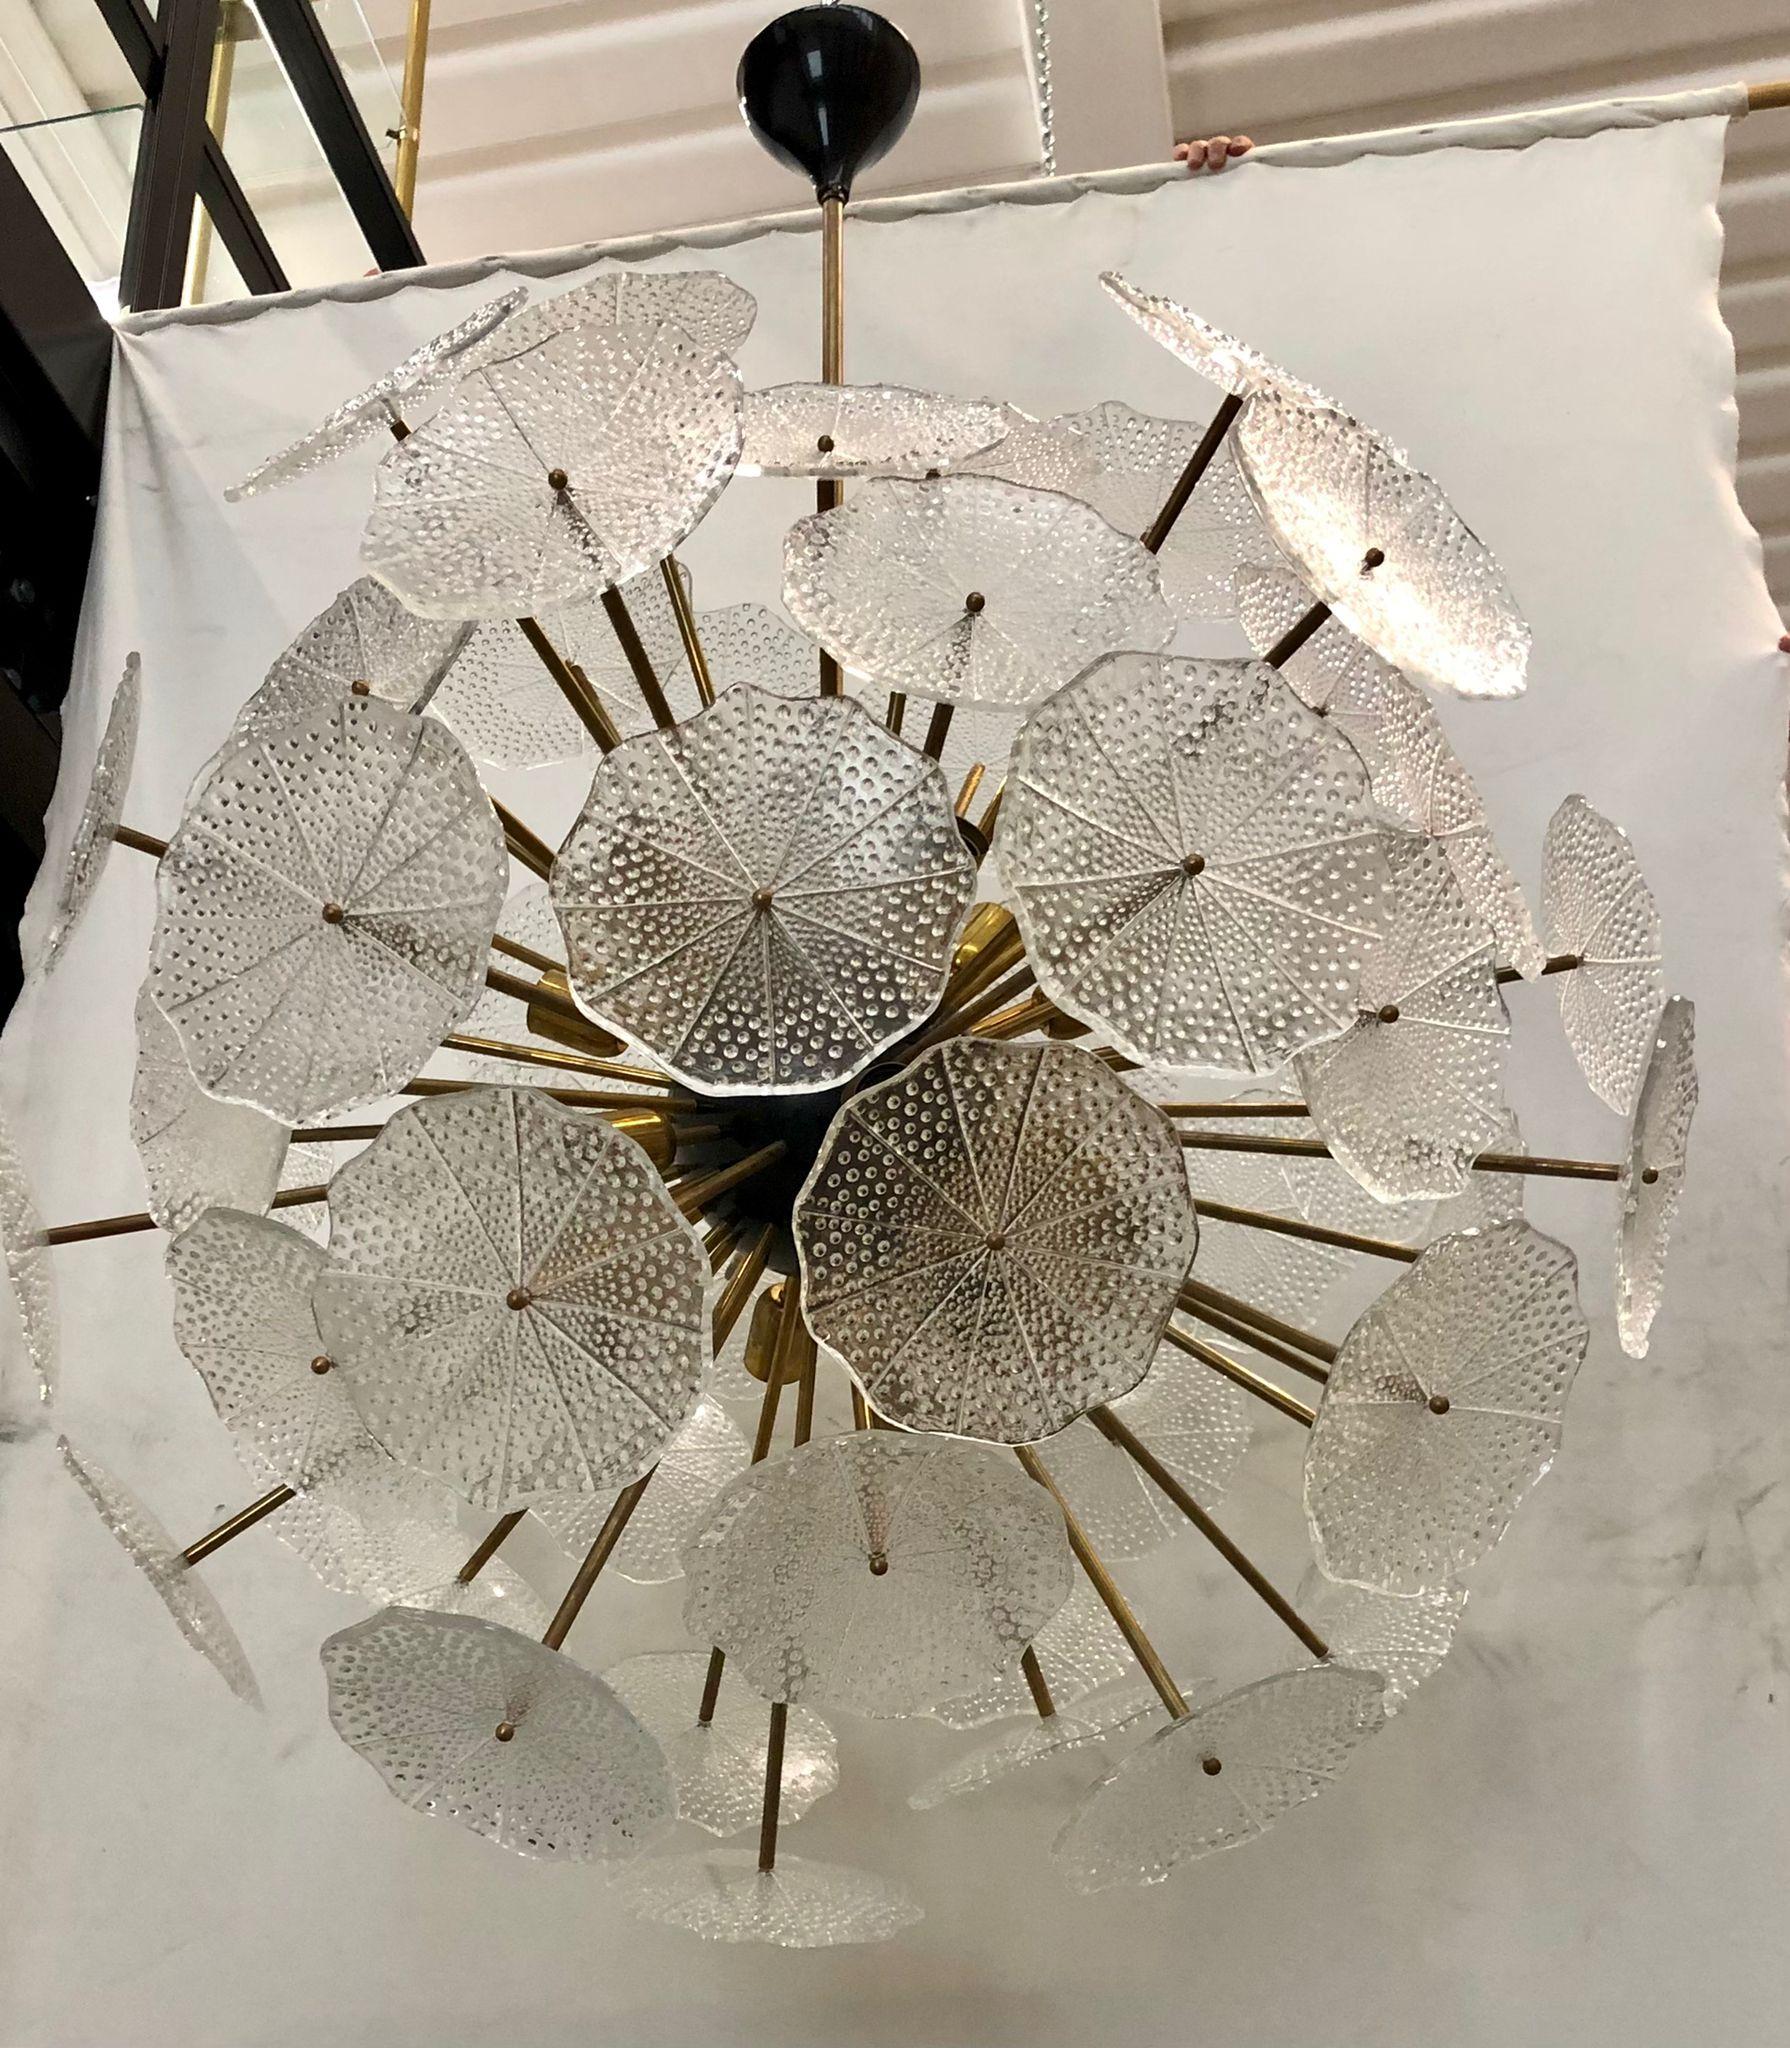 The large glass flowers make up this Murano chandelier from the 1980. A Classic Sputnik from the middle of the century.

Made of a large central sphere in which brass rods are screwed, glass leaves are placed above the brass rods. It has 18-light